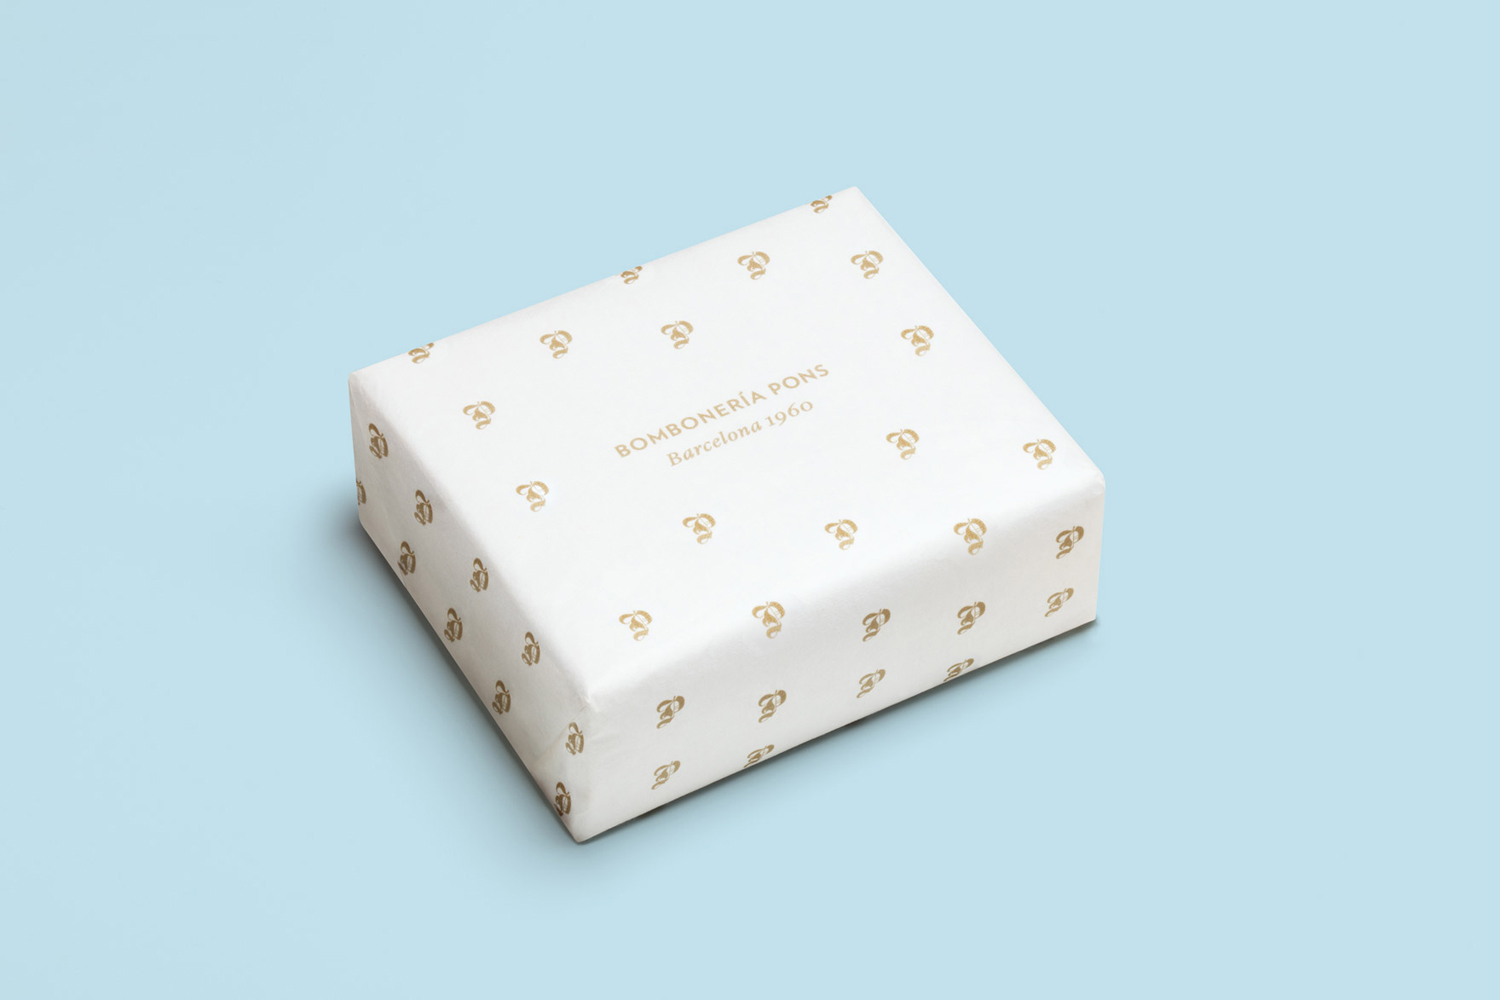 Brand identity and packaging for chocolatier and confectioner Bombonería Pons designed by Mucho